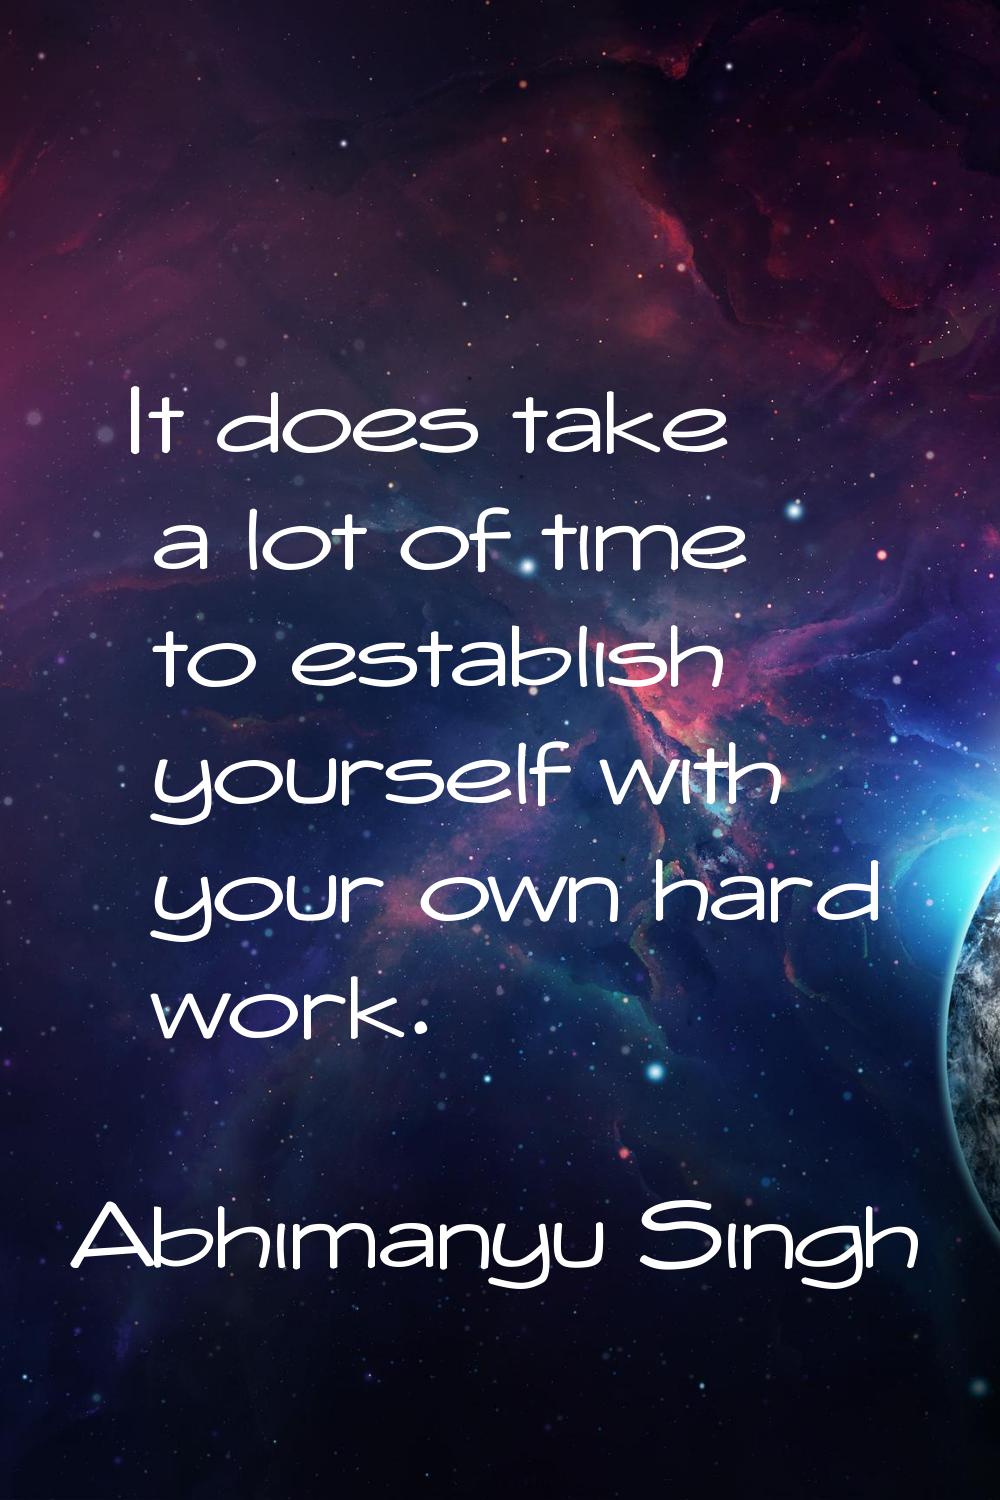 It does take a lot of time to establish yourself with your own hard work.